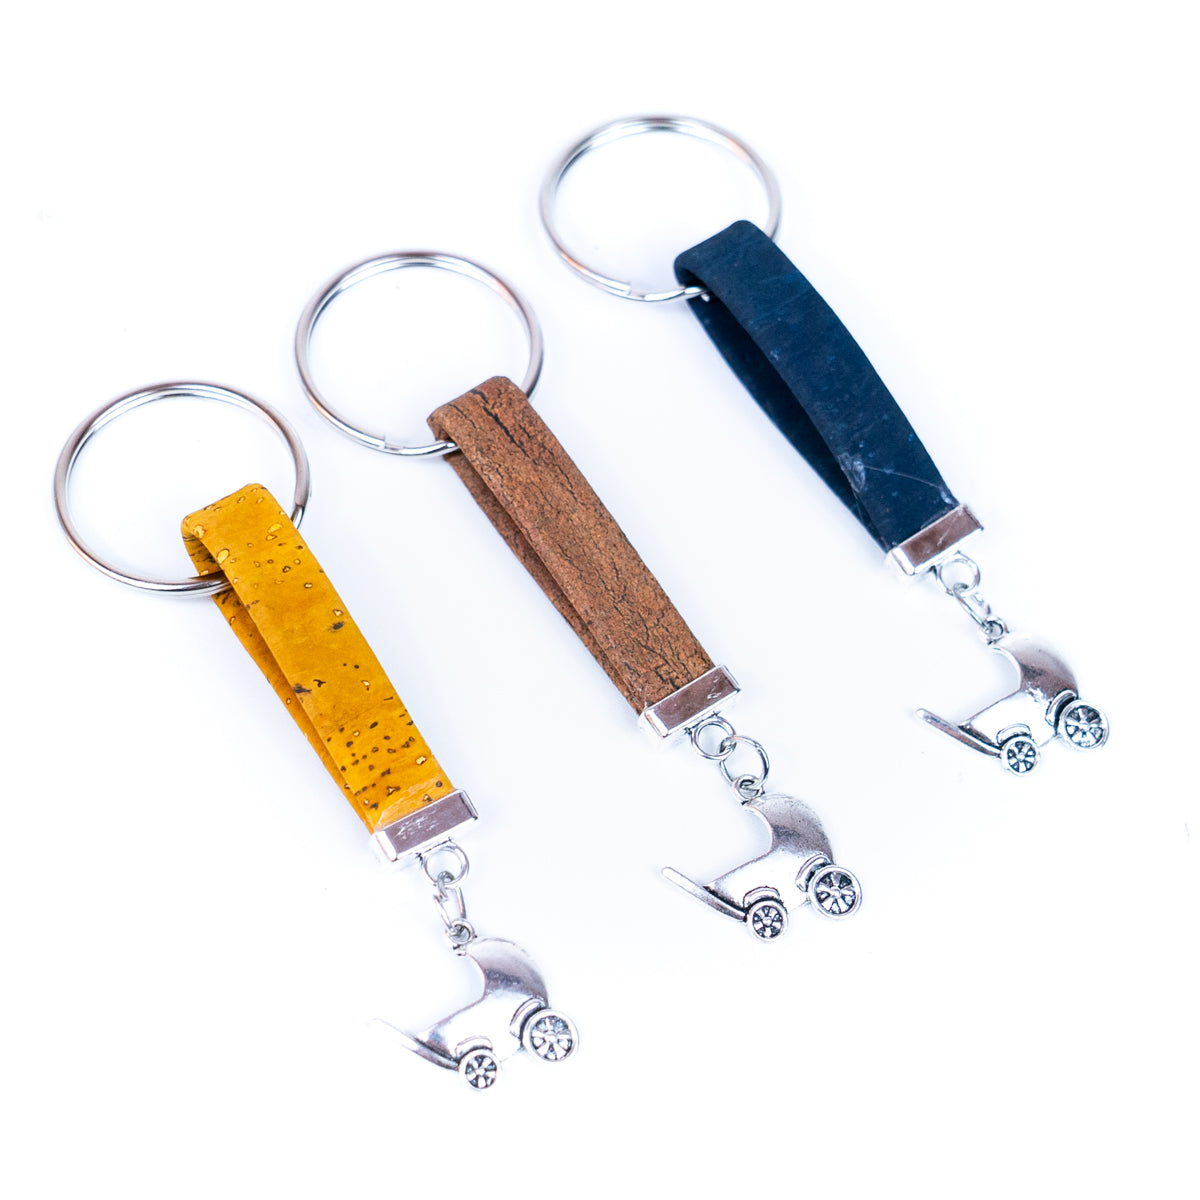 Natural Colorful Cork Cord & Cute Stroller Pendant Handmade Keychain I-088-MIX-10